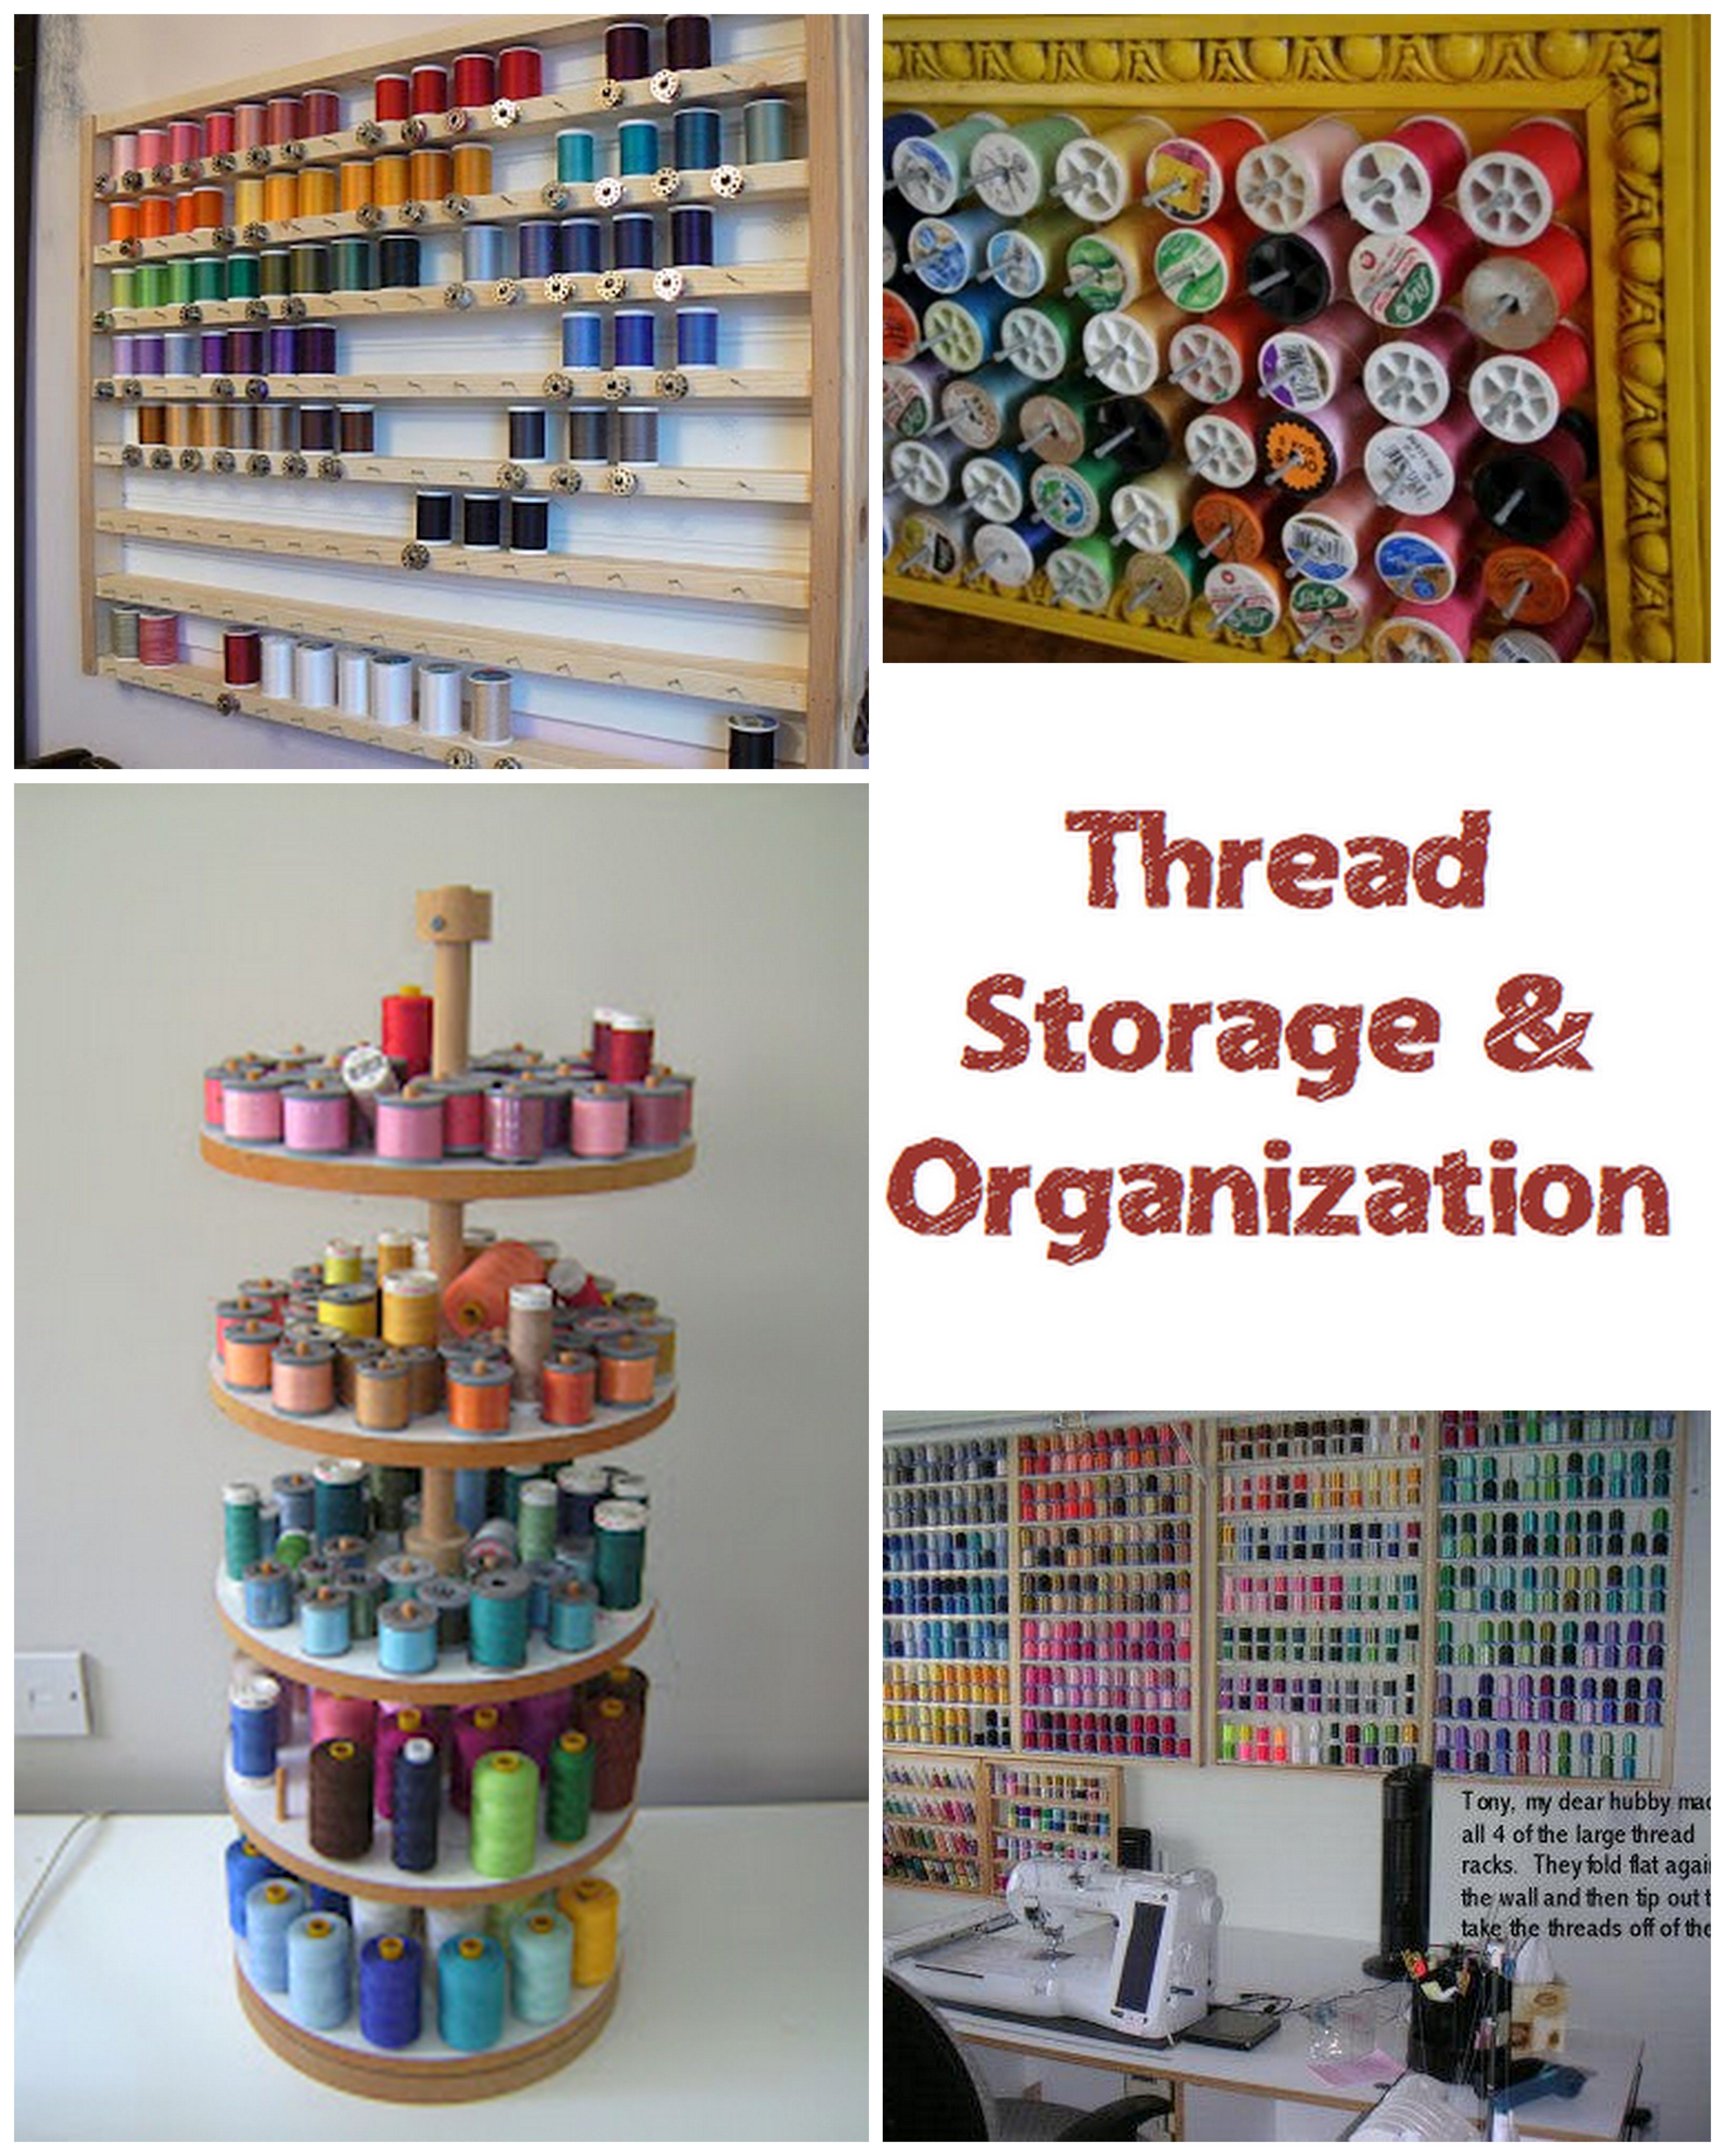 Tangled threads? Here are some thread storage and organization photos to inspire you in your sewing room!